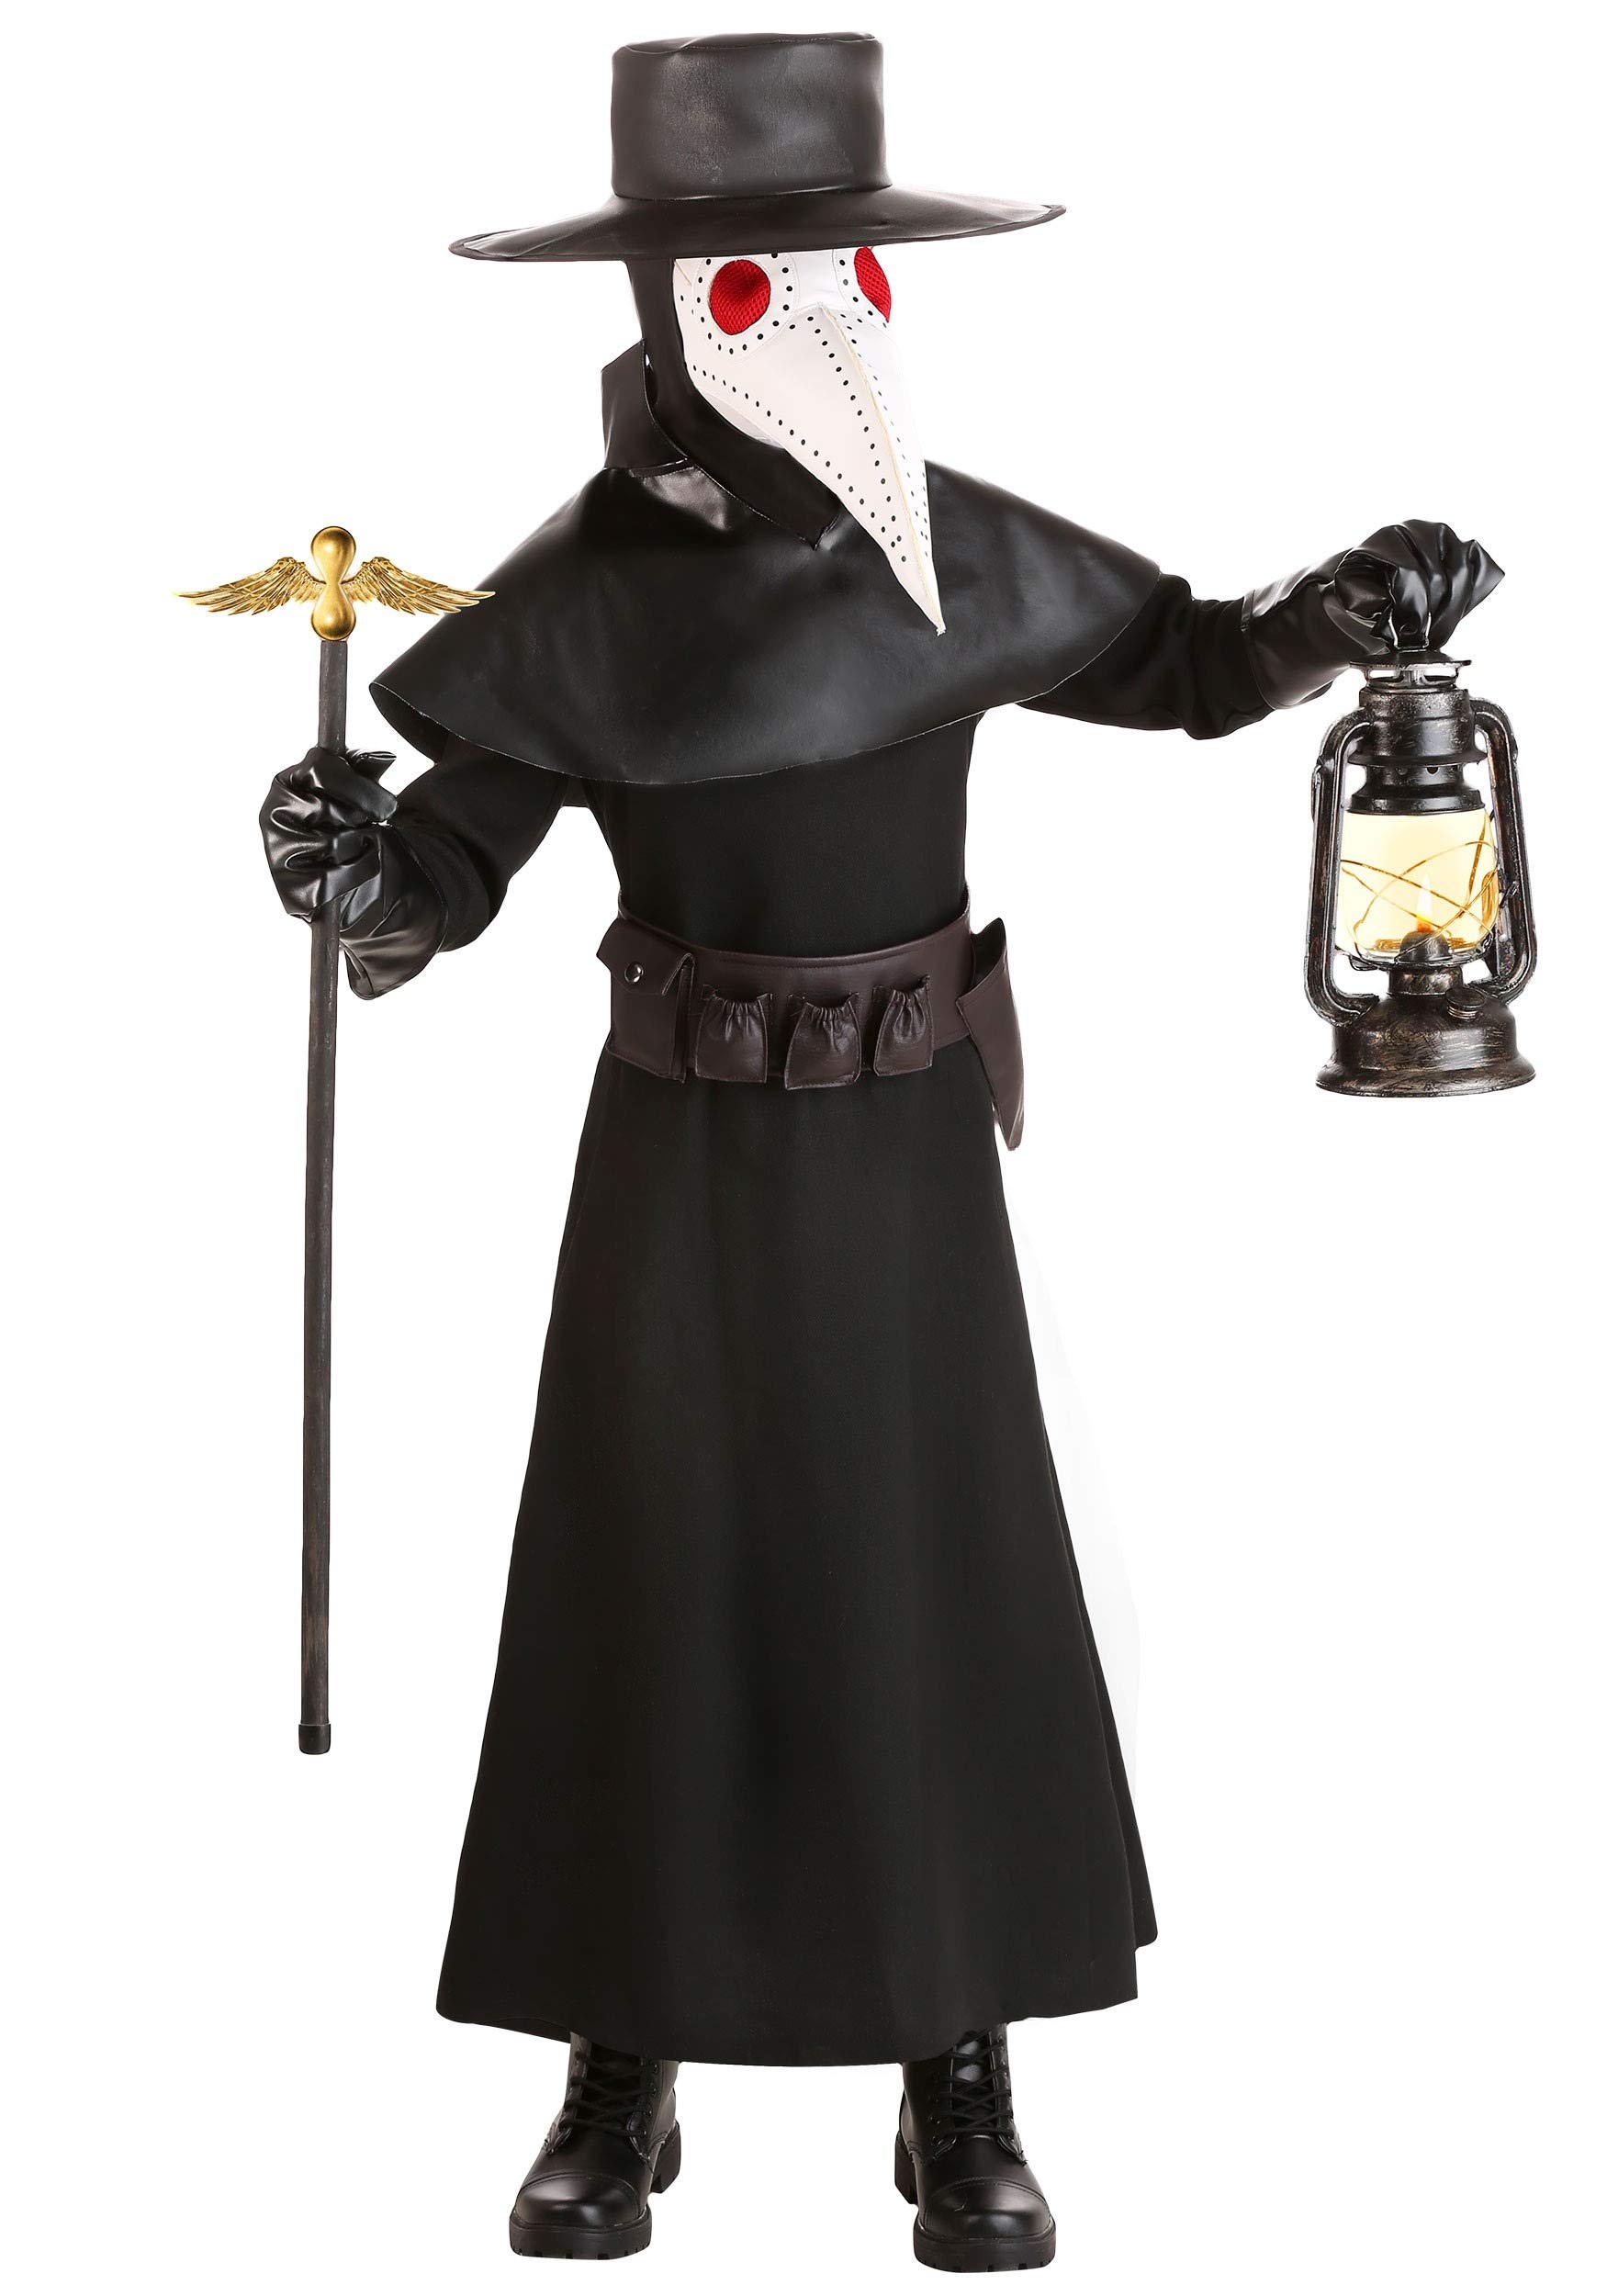 Kids Black Plague Doctor Costume, Scary Masked 16th Century Bubonic Physician Halloween Outfit